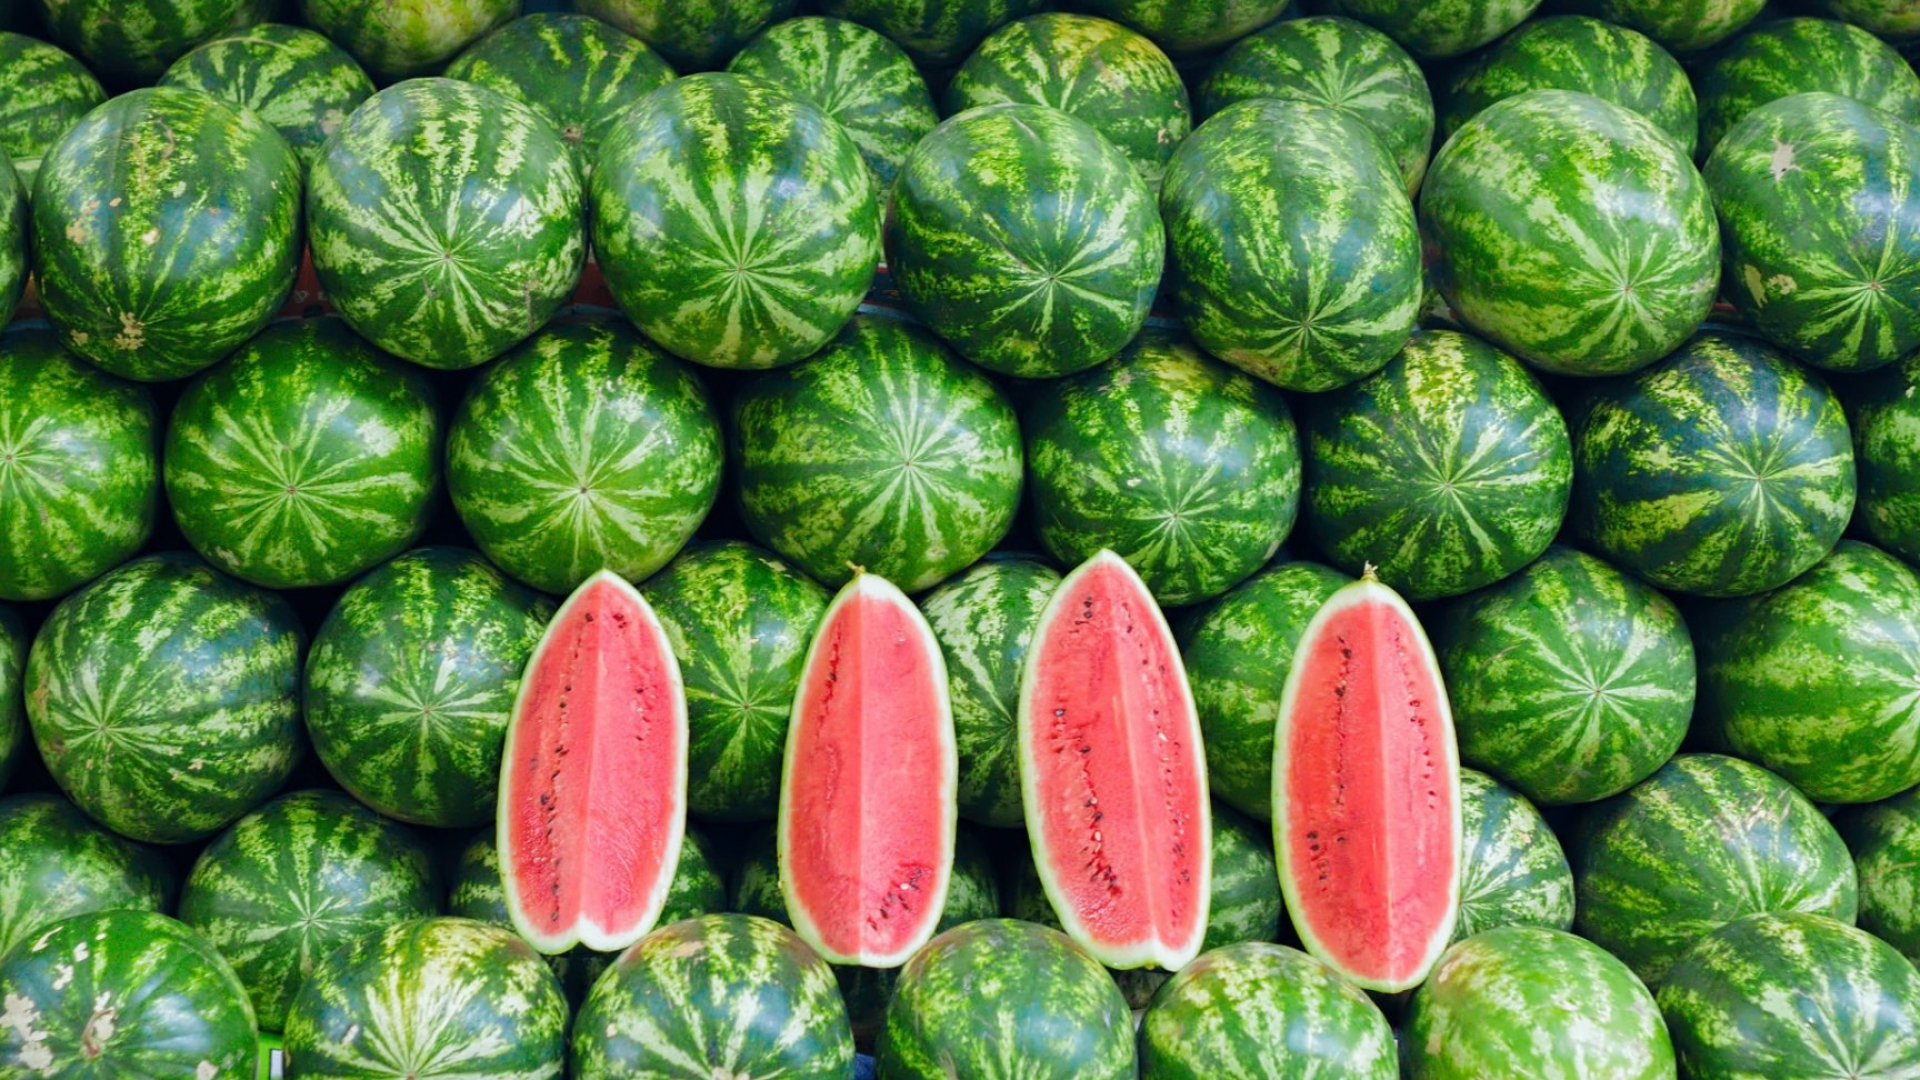 Watermelon: A hydrating, micronutrient-rich fruit with a host of vitamins while being low calorie. 1920x1080 Full HD Wallpaper.